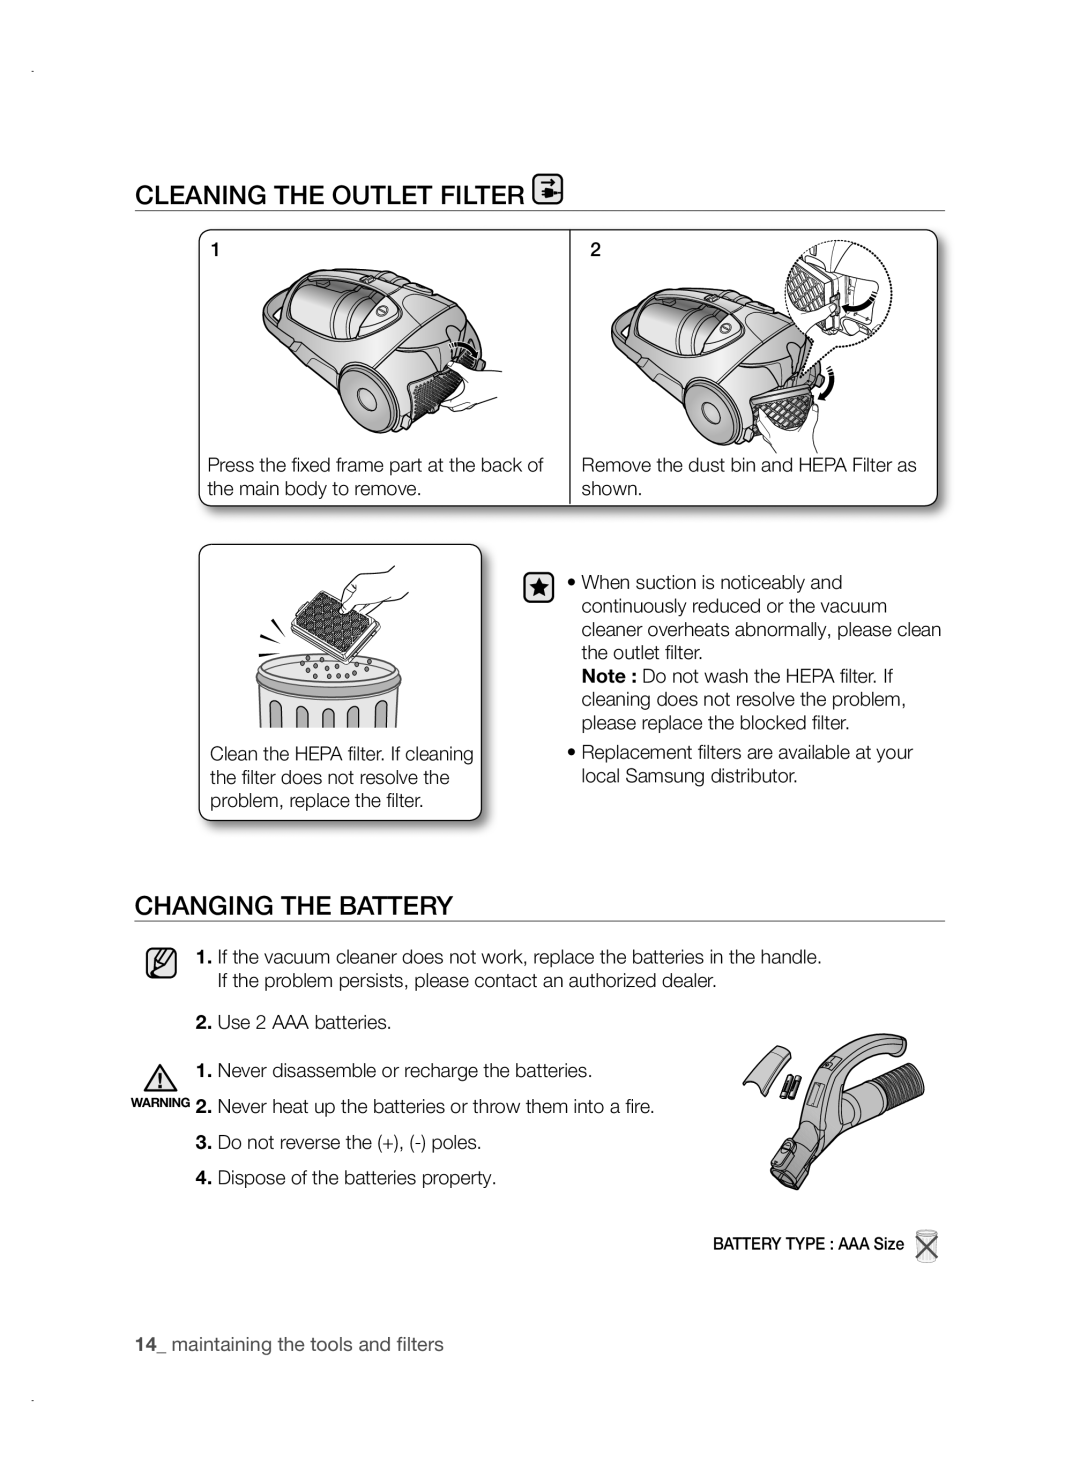 Samsung VCC88P0H1B user manual Cleaning The Outlet Filter, Changing The Battery, maintaining the tools and ﬁlters 